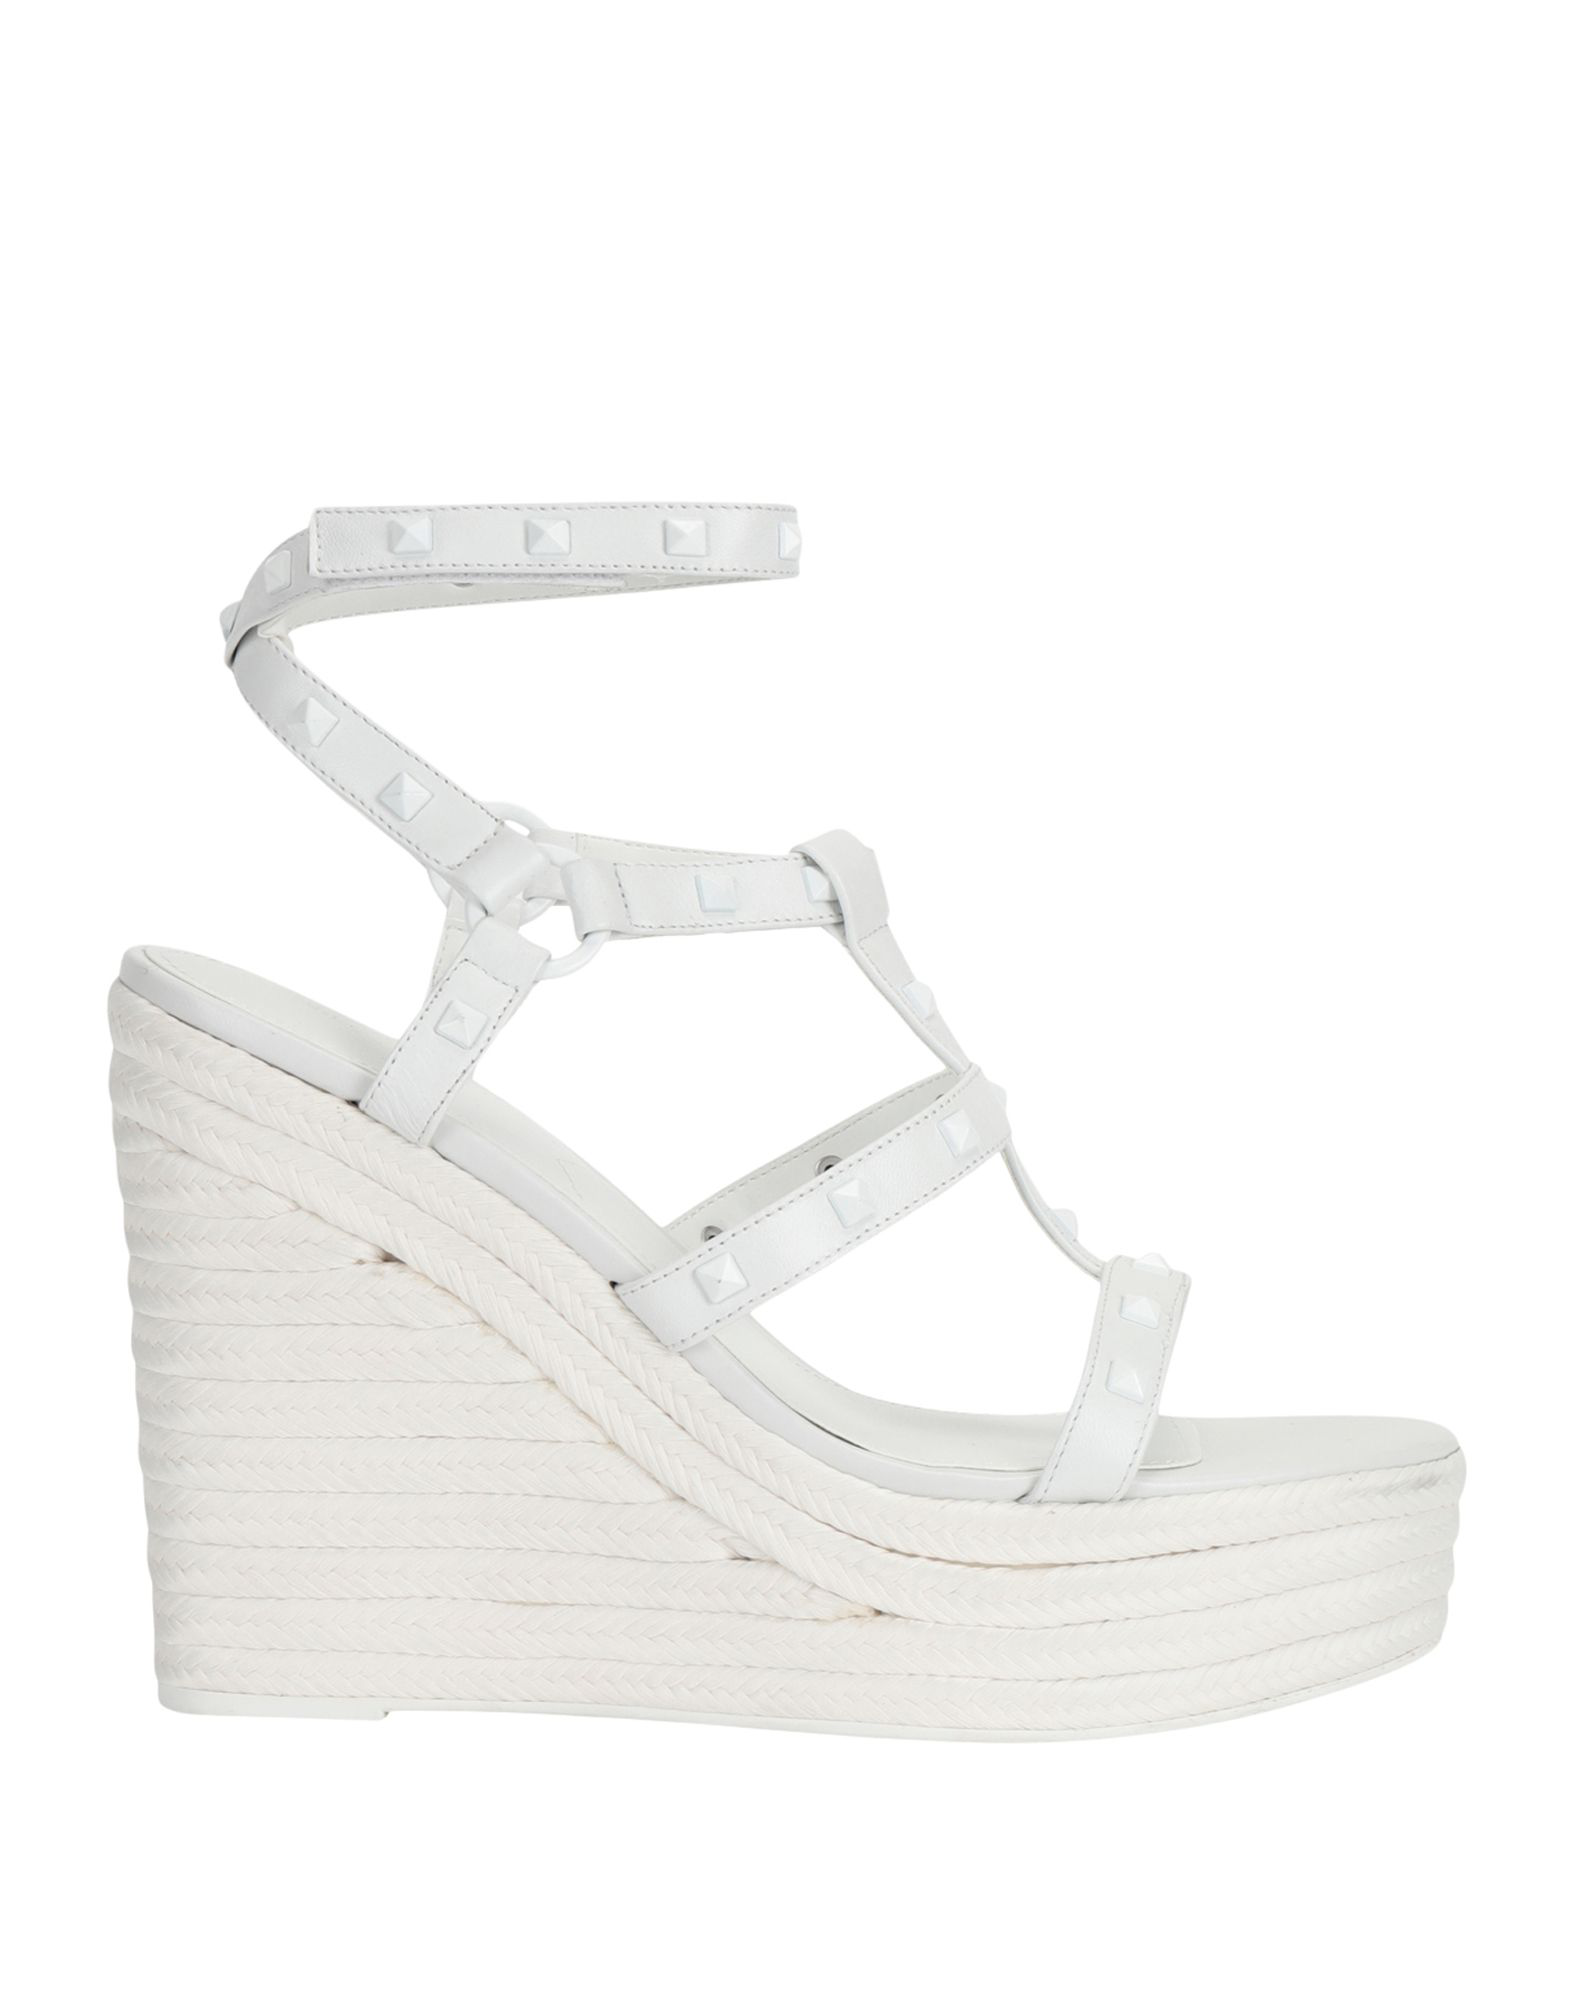 Kendall + Kylie Sandals In White | ModeSens